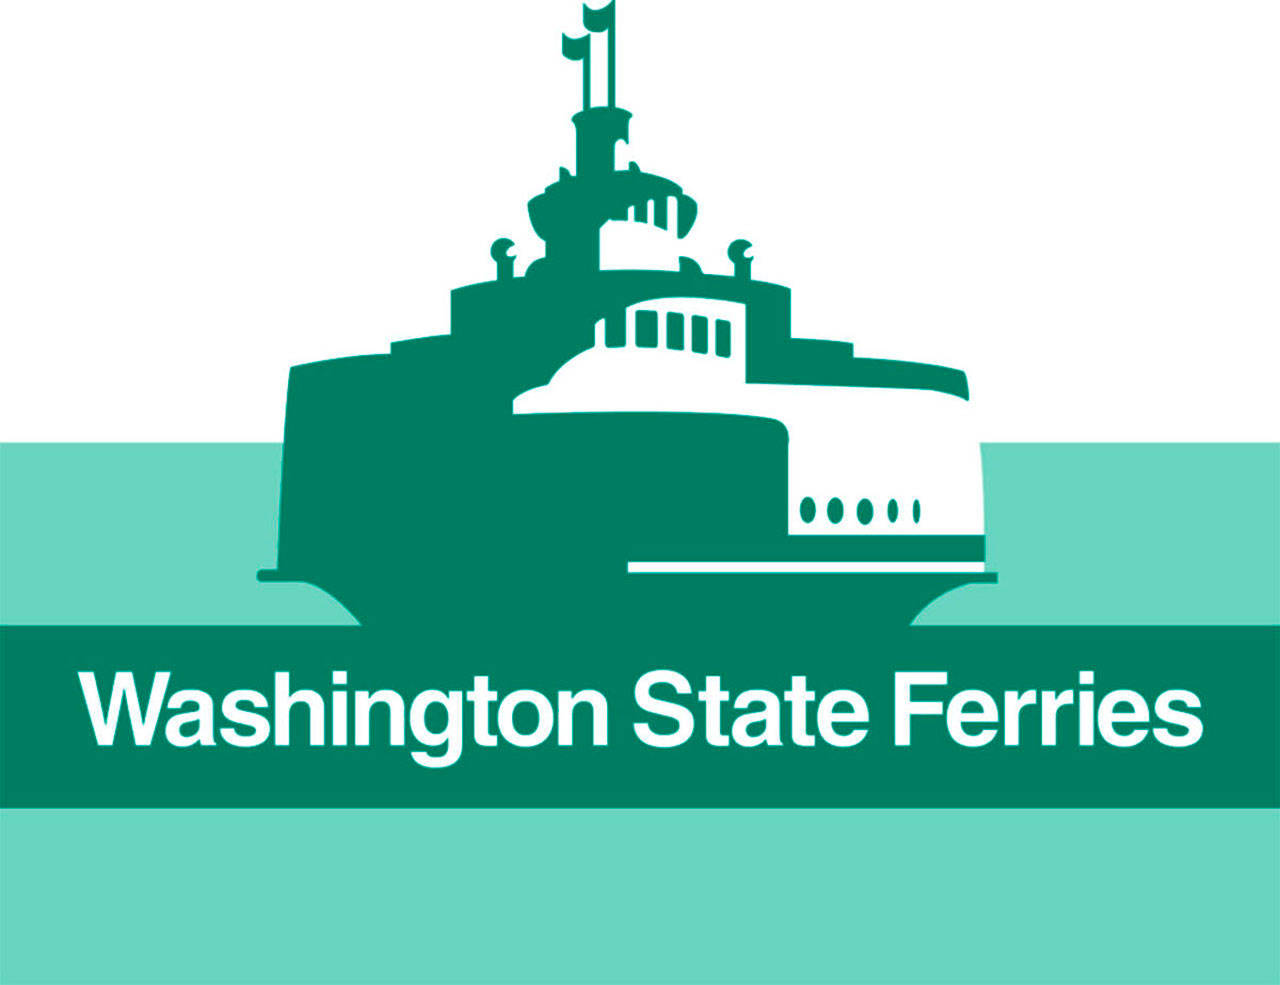 Annual ferry ridership up by 250,000 to 15-year high